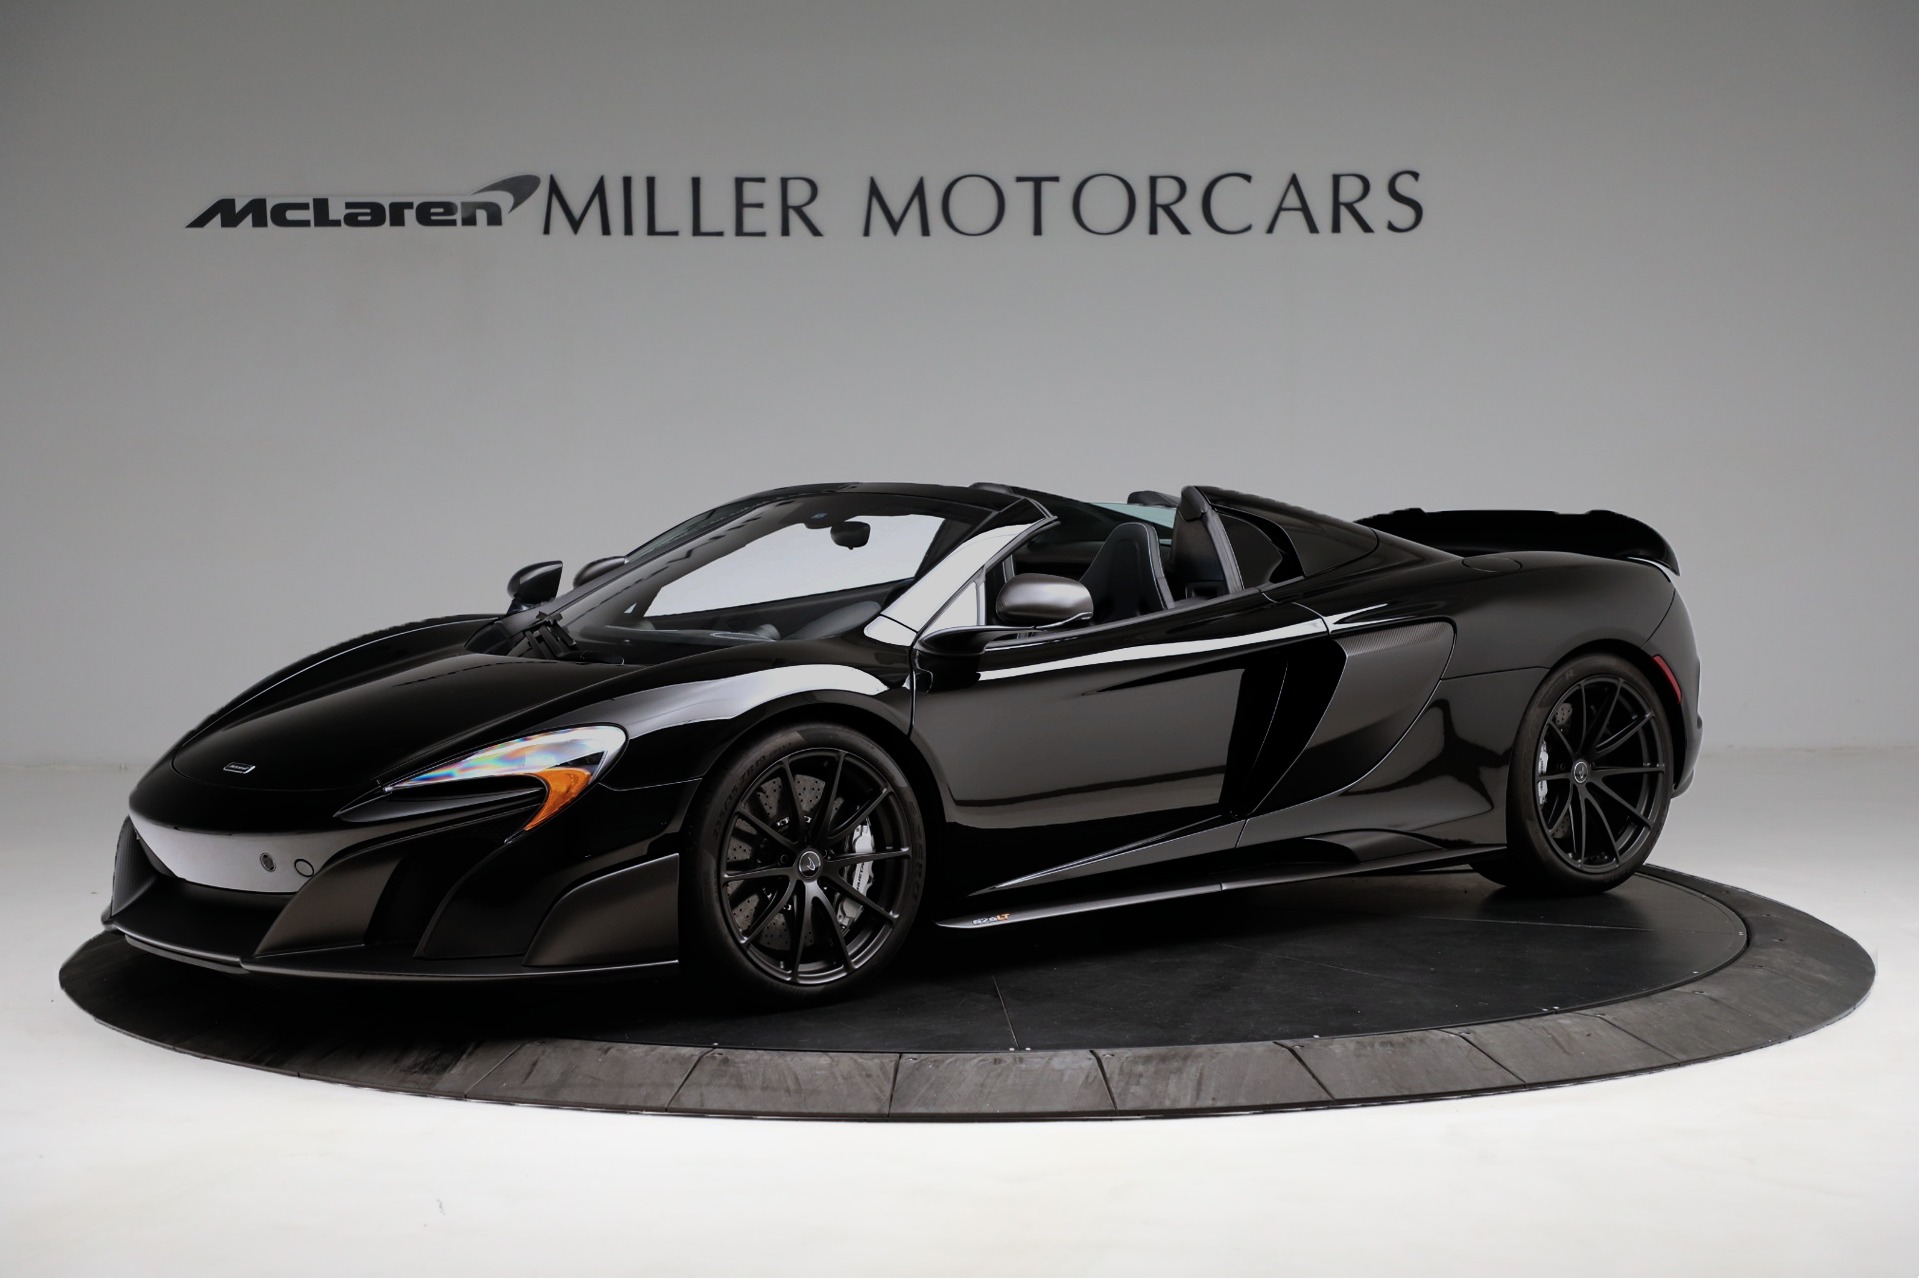 Used 2016 McLaren 675LT Spider for sale $365,900 at Rolls-Royce Motor Cars Greenwich in Greenwich CT 06830 1